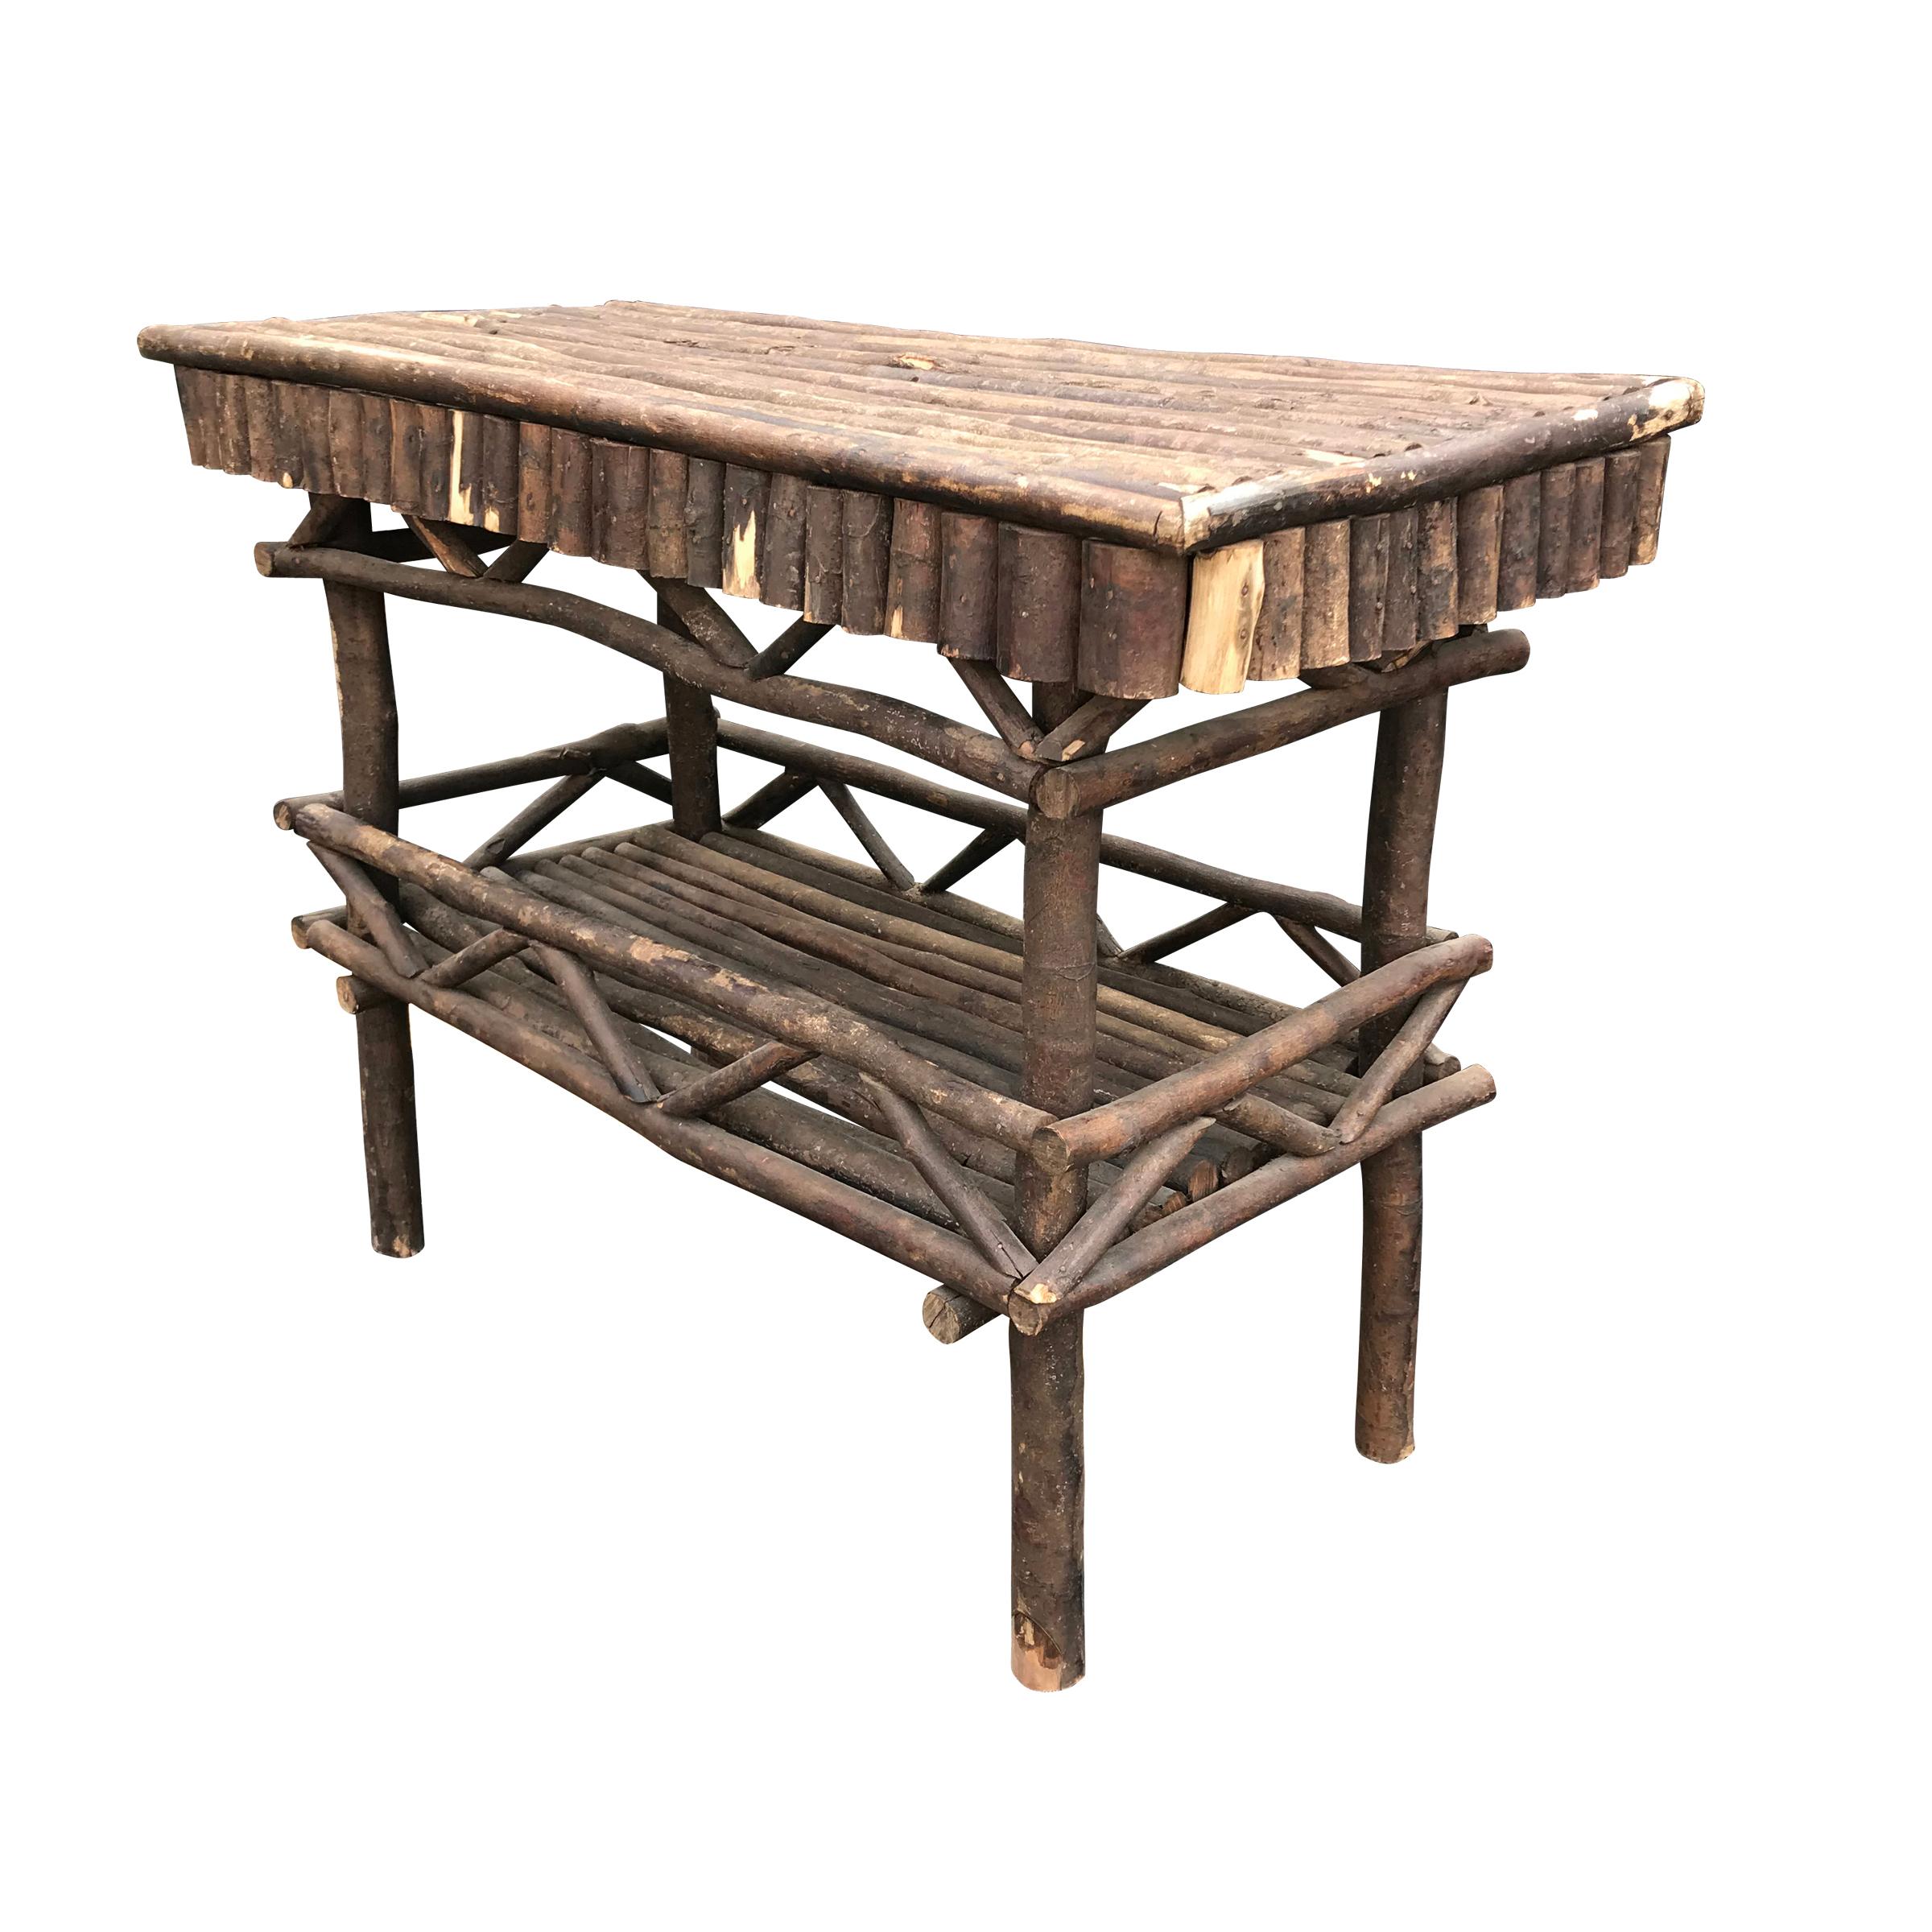 Early 20th Century Adirondack Style Table with Shelf